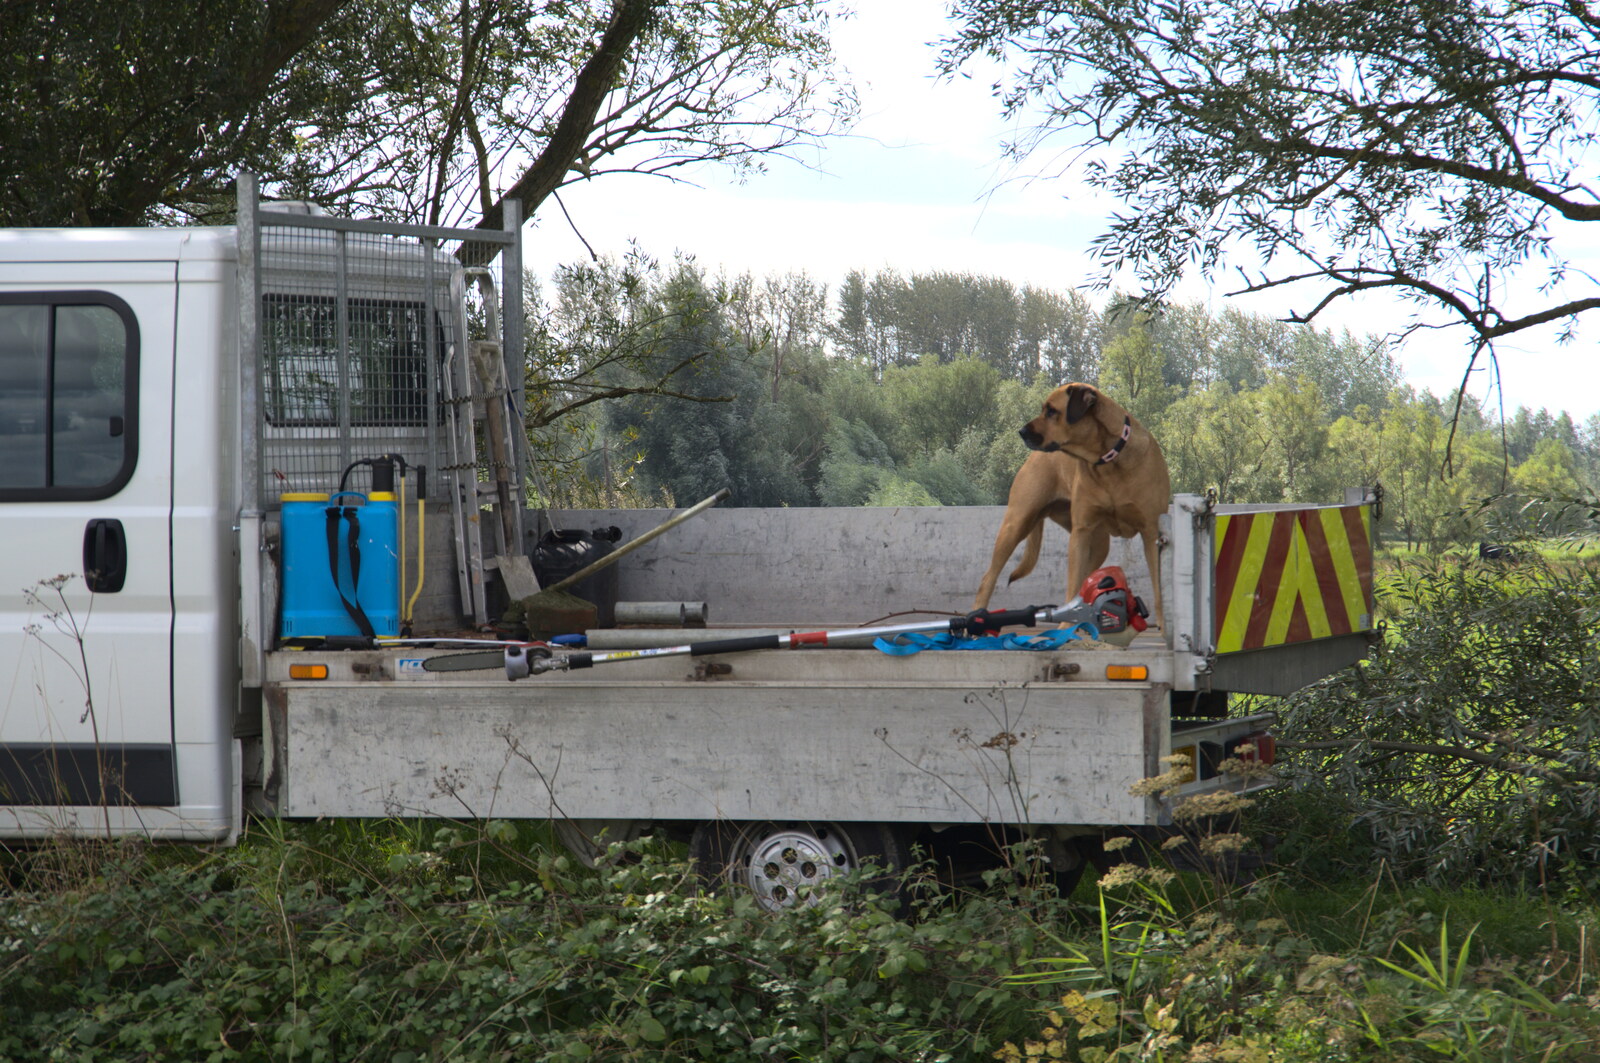 Camping at Three Rivers, Geldeston, Norfolk - 5th September 2020: A dog stands around on the back of a van